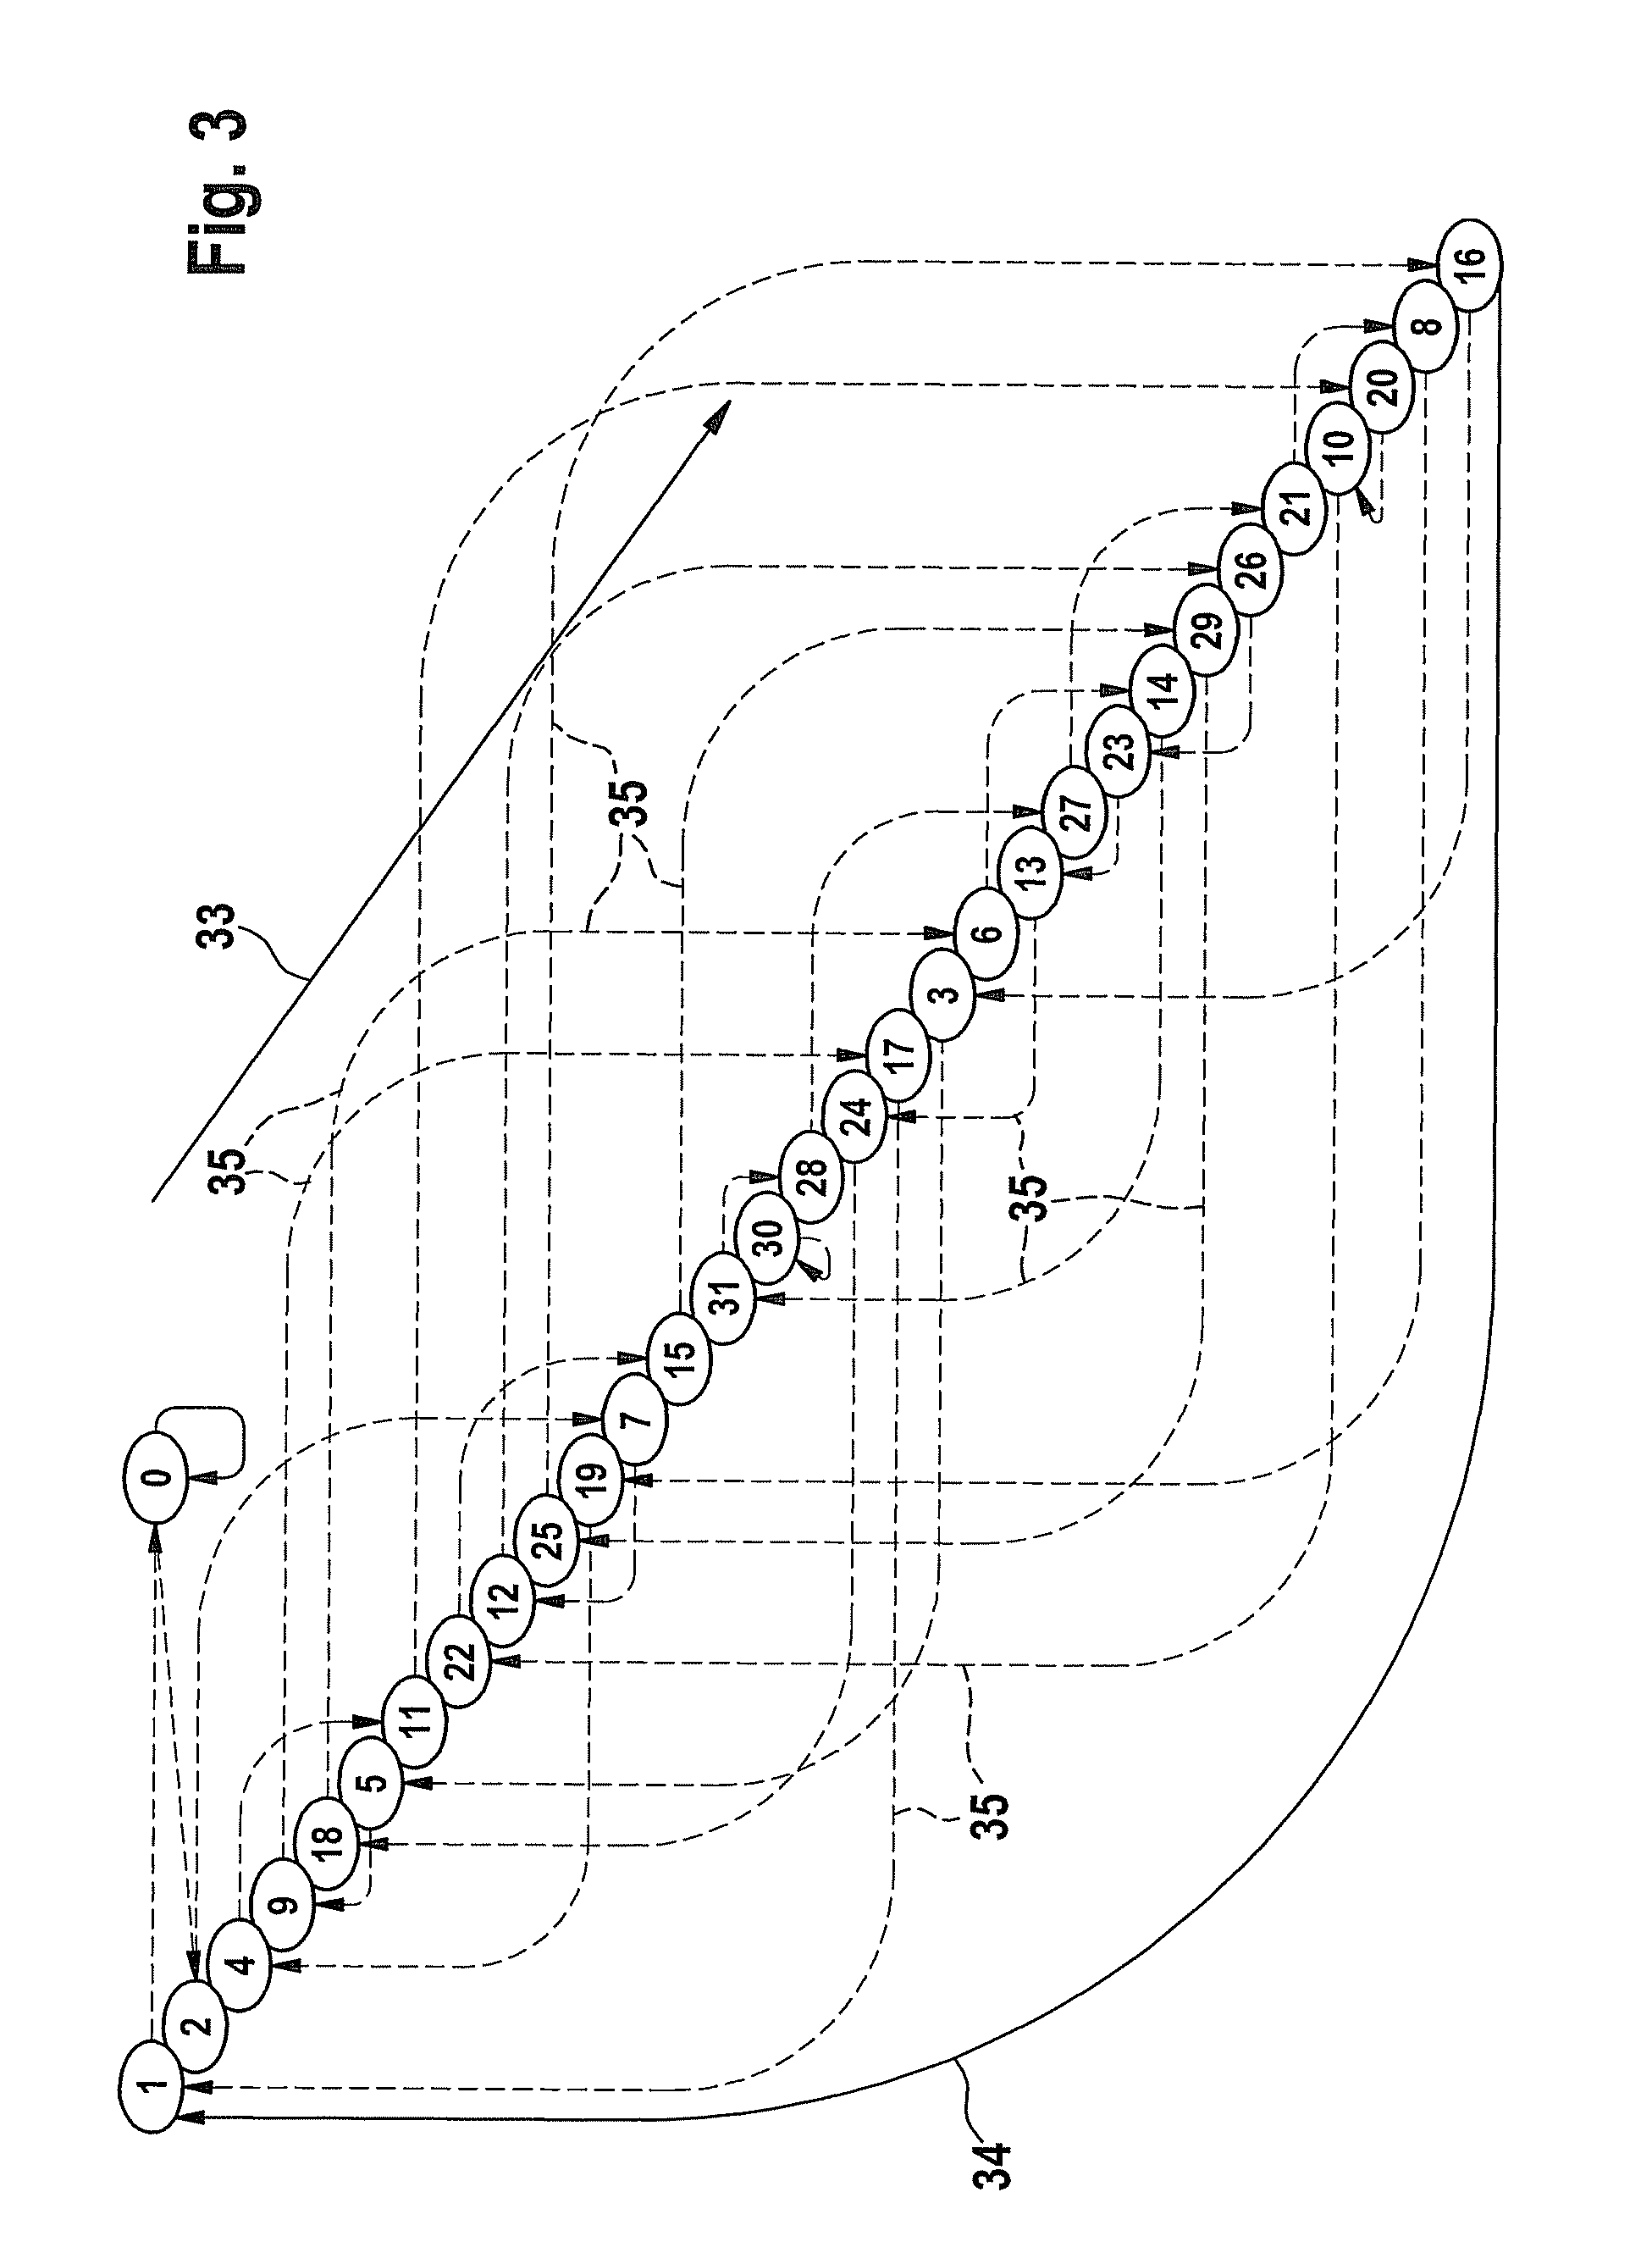 Method and device for manipulation-proof transmission of data